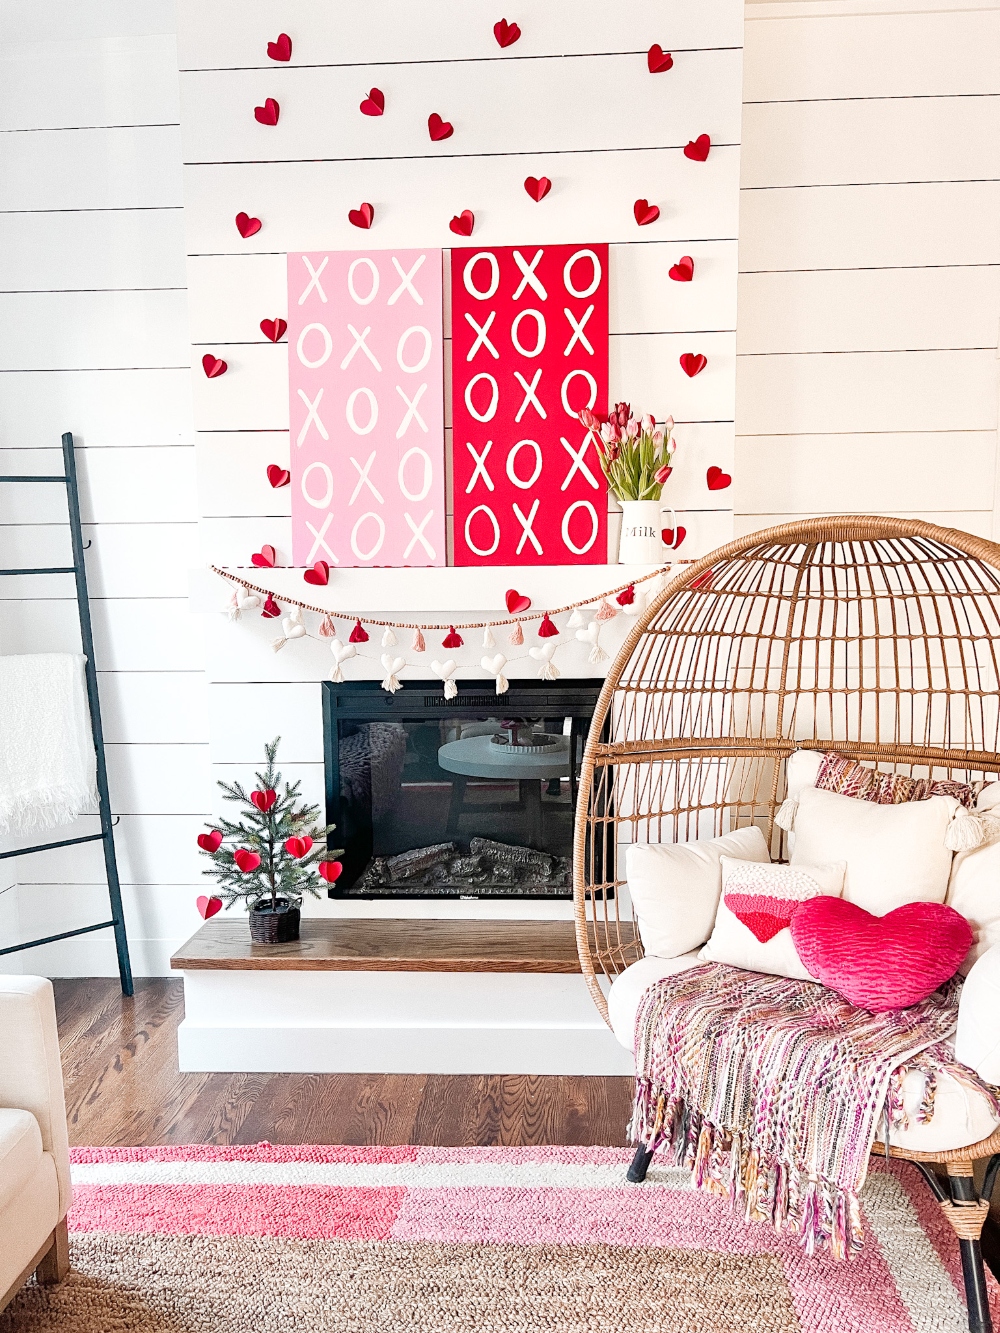 Valentine XOXO Mantel Ideas. Upcycle and paint some easy XOXO signs, add paper hearts and you have an adorable mantel or shelf vignette! 